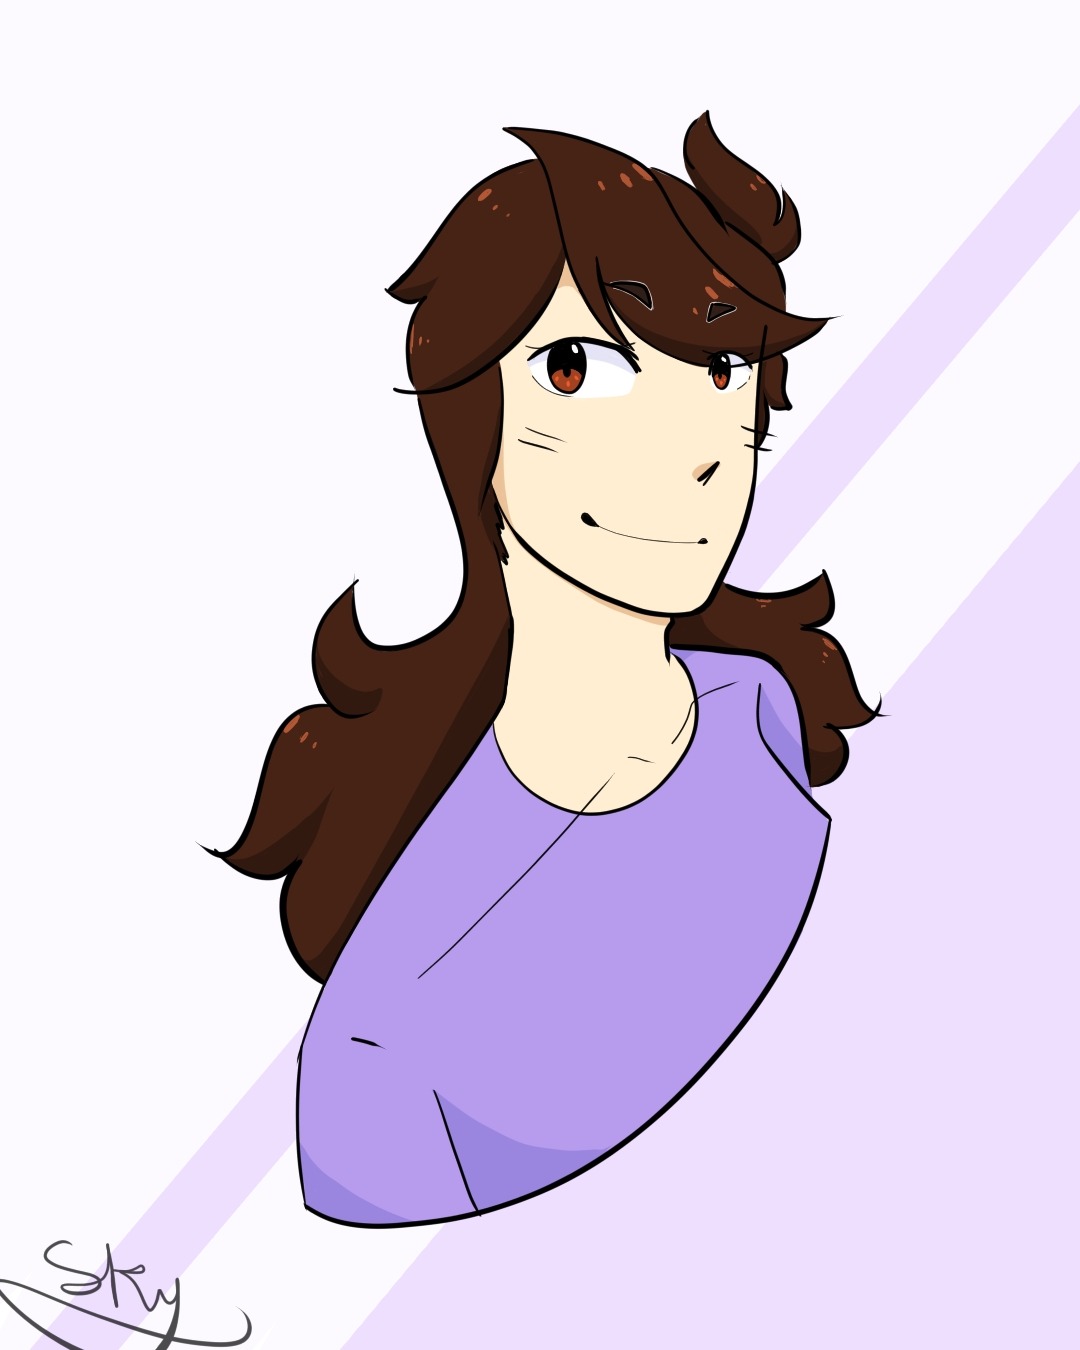 rapidly apologises* — here have a jaiden fanart